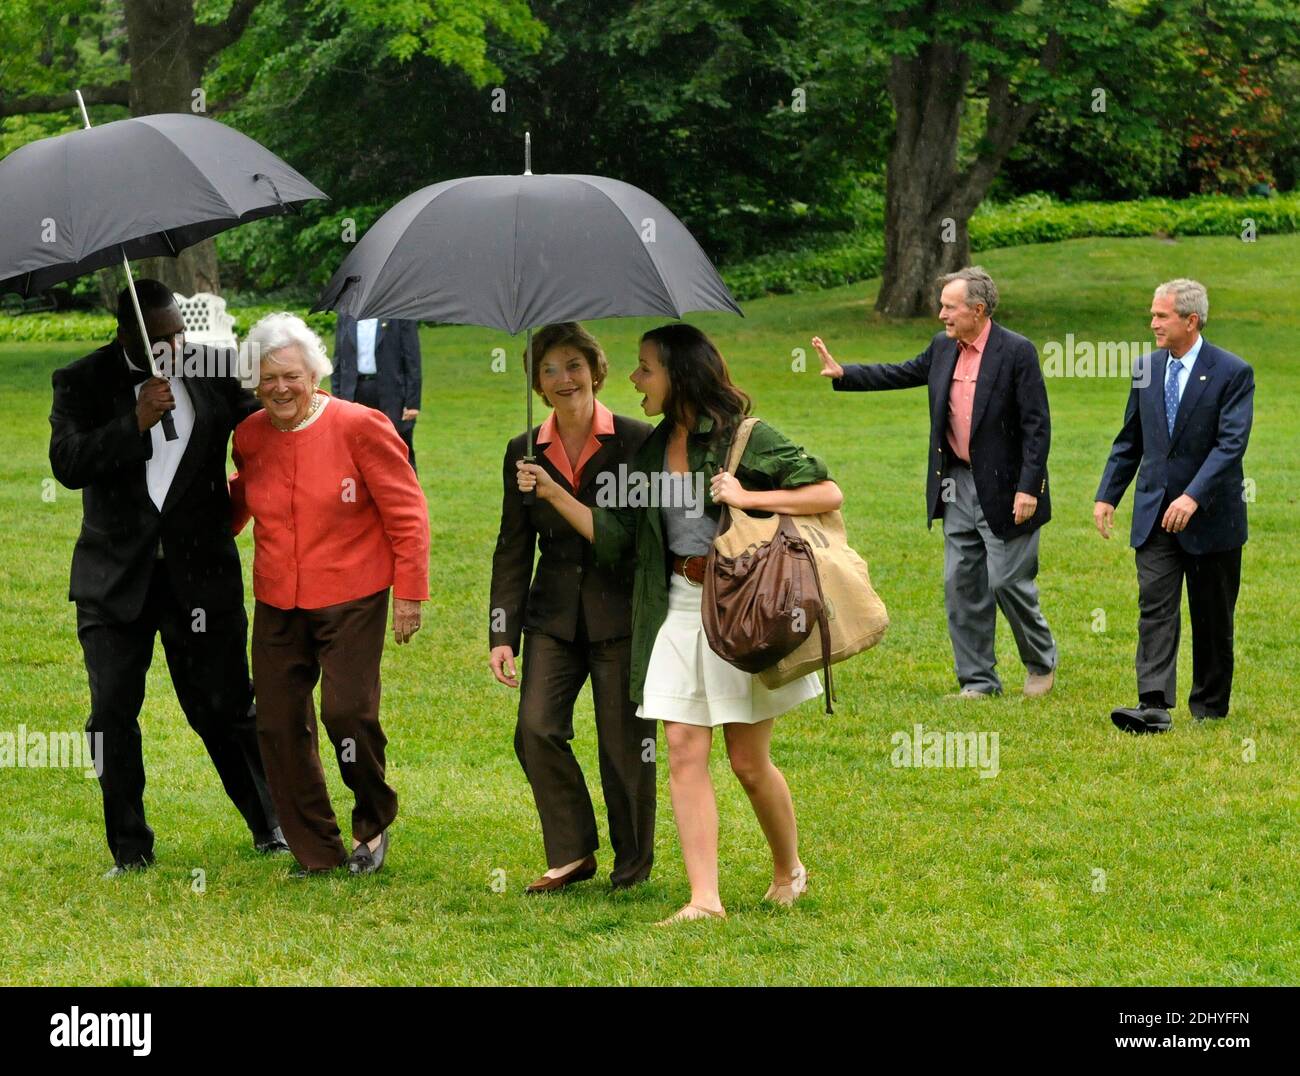 Former United States President George H.W. Bush (2nd,R) walks with US President George W. Bush as an aide assists former first lady Barbara Bush and first lady Laura Bush (C) walks with daughter Barbara, as they arrive at the White House from a weekend at the Crawford, Texas ranch, 11 May 2008 in Washington, DC, USA. Bush, whose daughter Jenna married Henry Hager at the ranch, described the experience as 'spectacular' and 'it's all we could have hoped for'. Photo by Mike Theiler/CNP/ABACAPRESS.COM Stock Photo